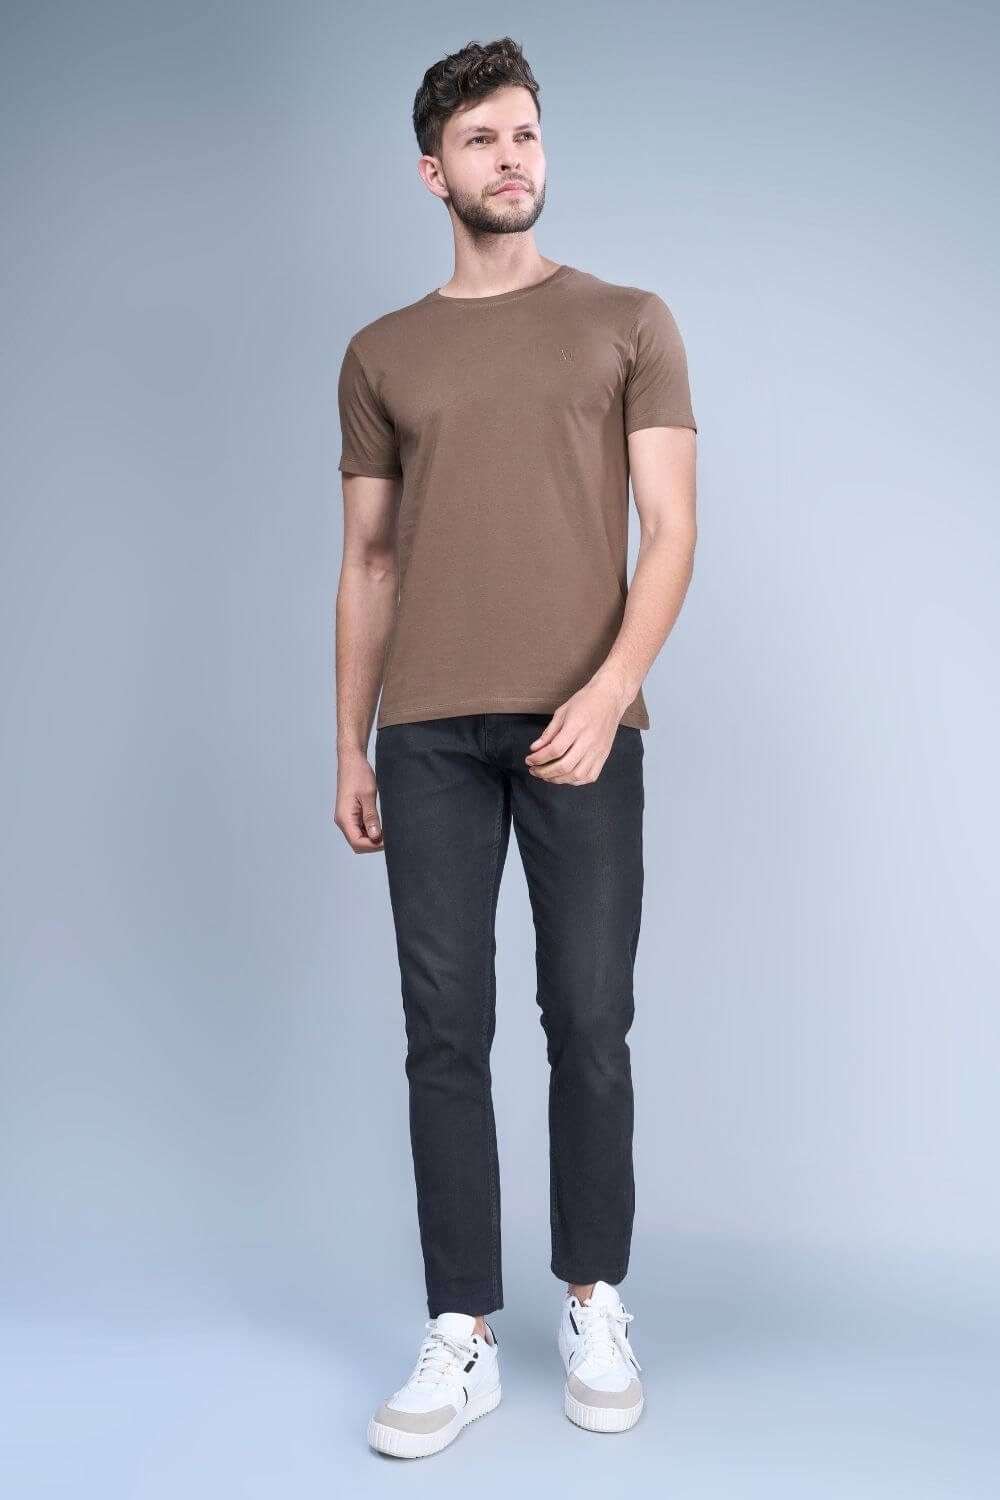 Brown colored, cotton solid T shirt for men with half sleeves and round neck from vibgyor series collection, full view.